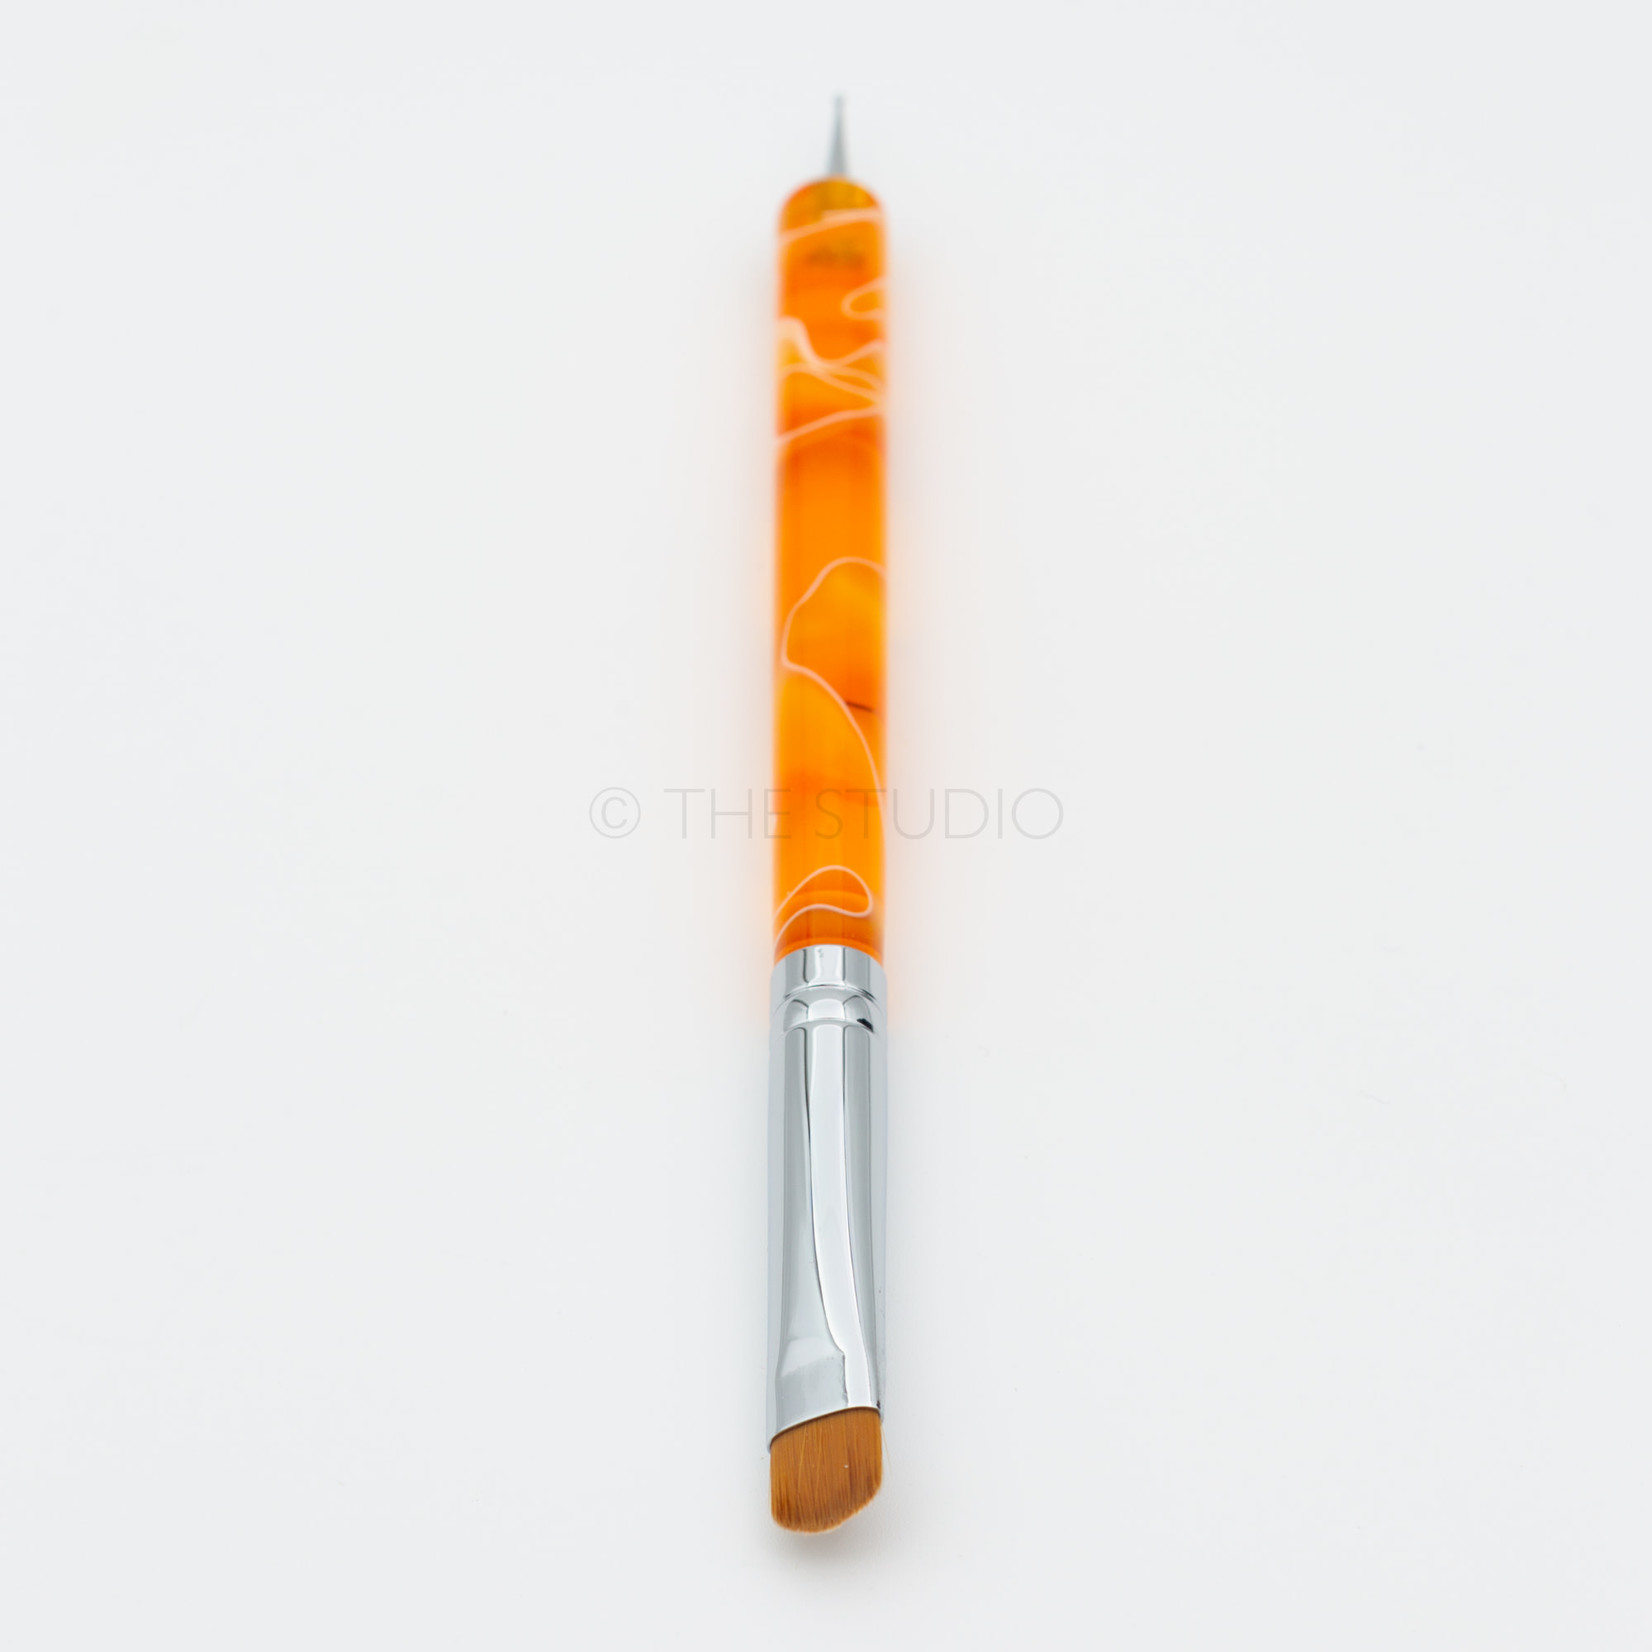 Cre8tion Cre8tion - French Brush w/ Dotting Tool - #12 Orange - 12126